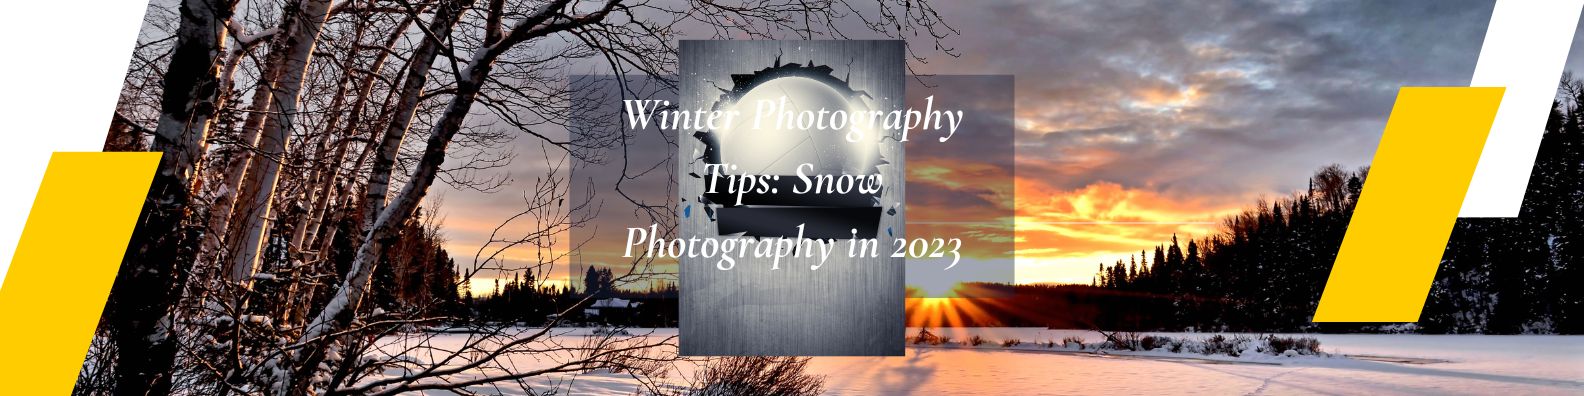 Winter Photography Tips Snow Photography in 2023